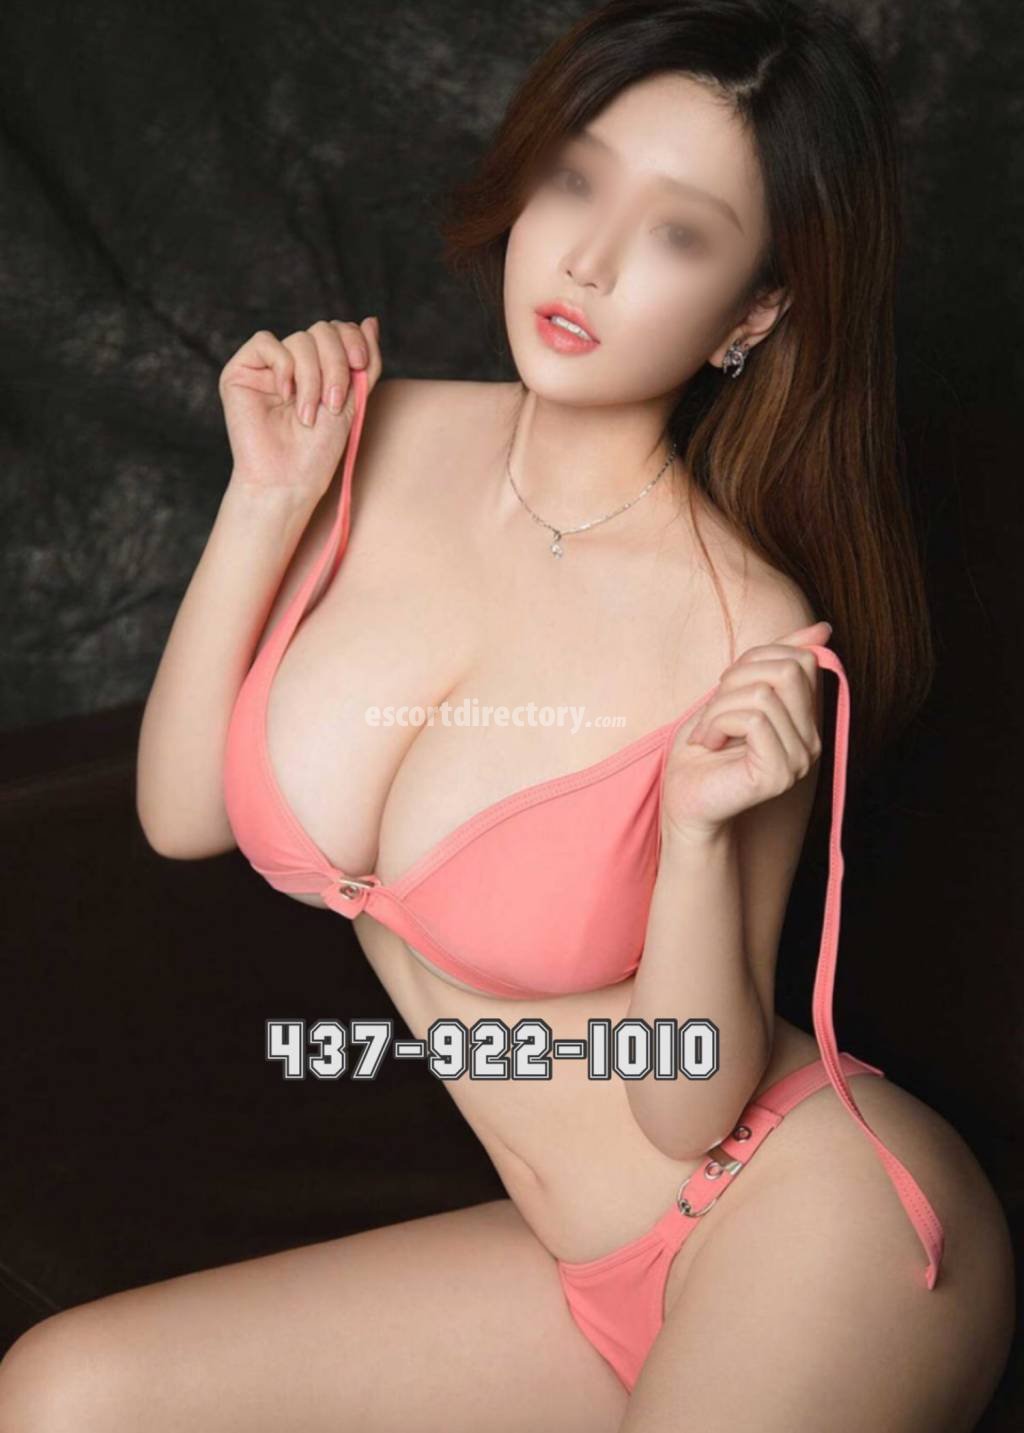 Party-girl-Amy Vip Escort escort in Toronto offers Girlfriend Experience (GFE) services